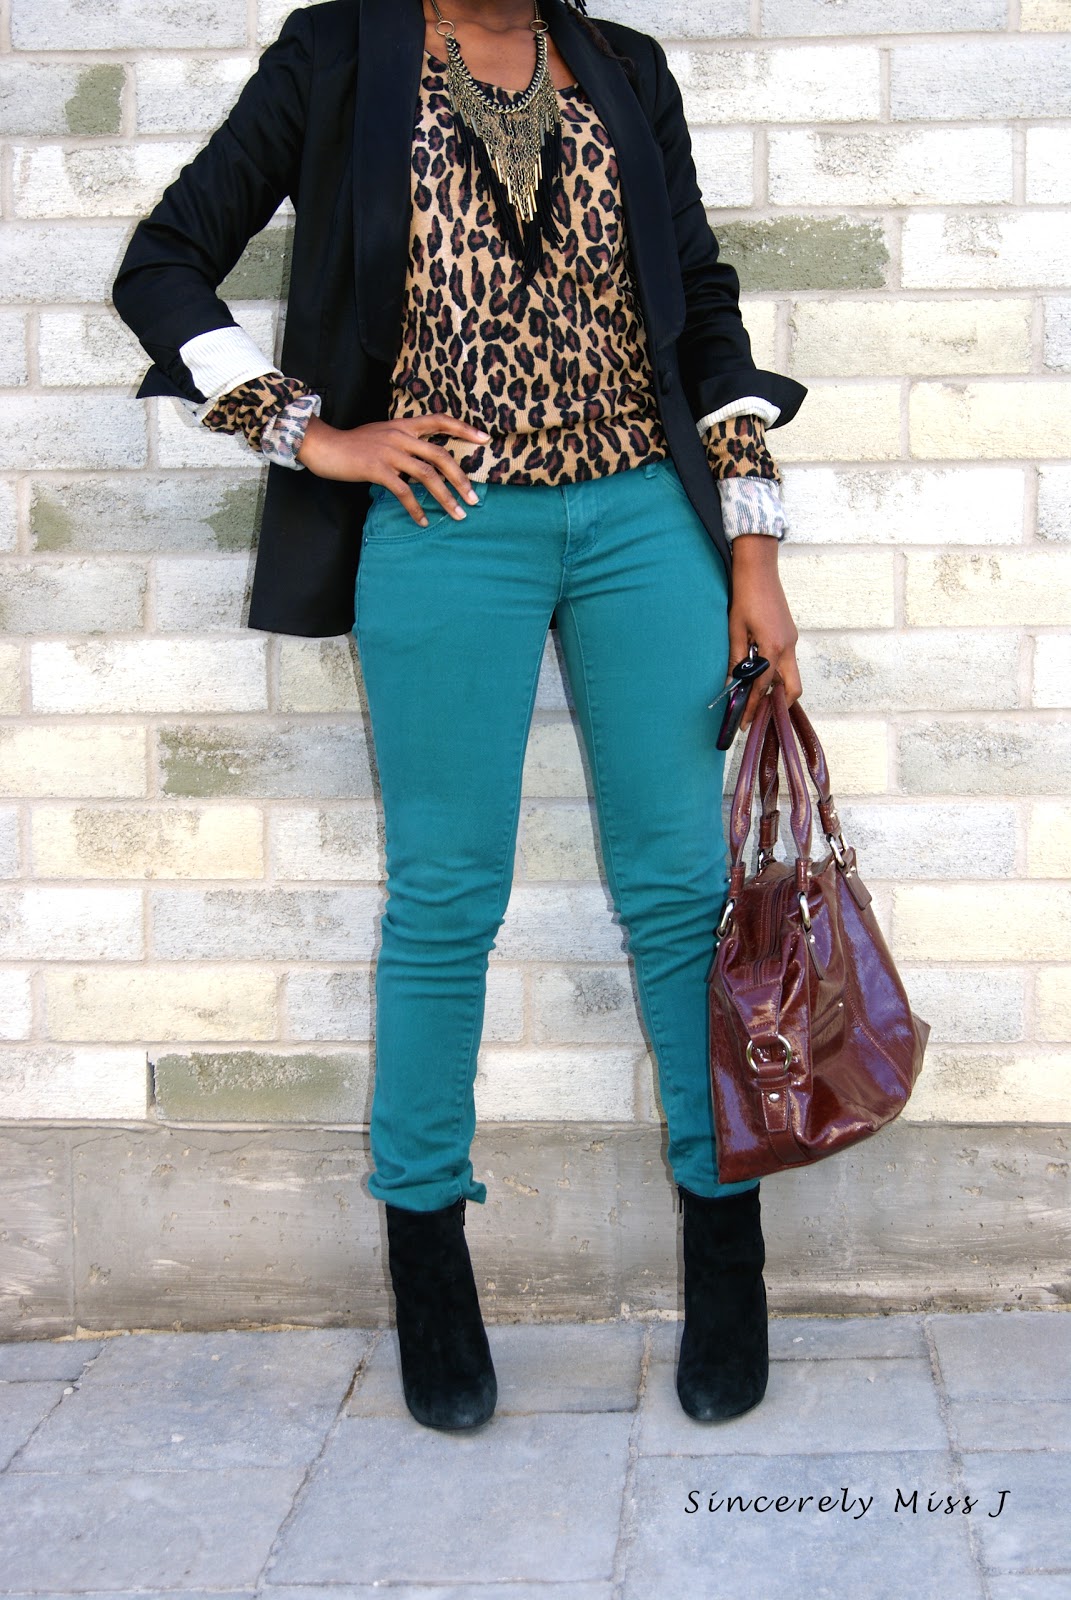 Animal print sweater: thrifted, Necklace & earrings: Jules & Jem, Colored Jeans: thrifted, Boots: thrifted, bag